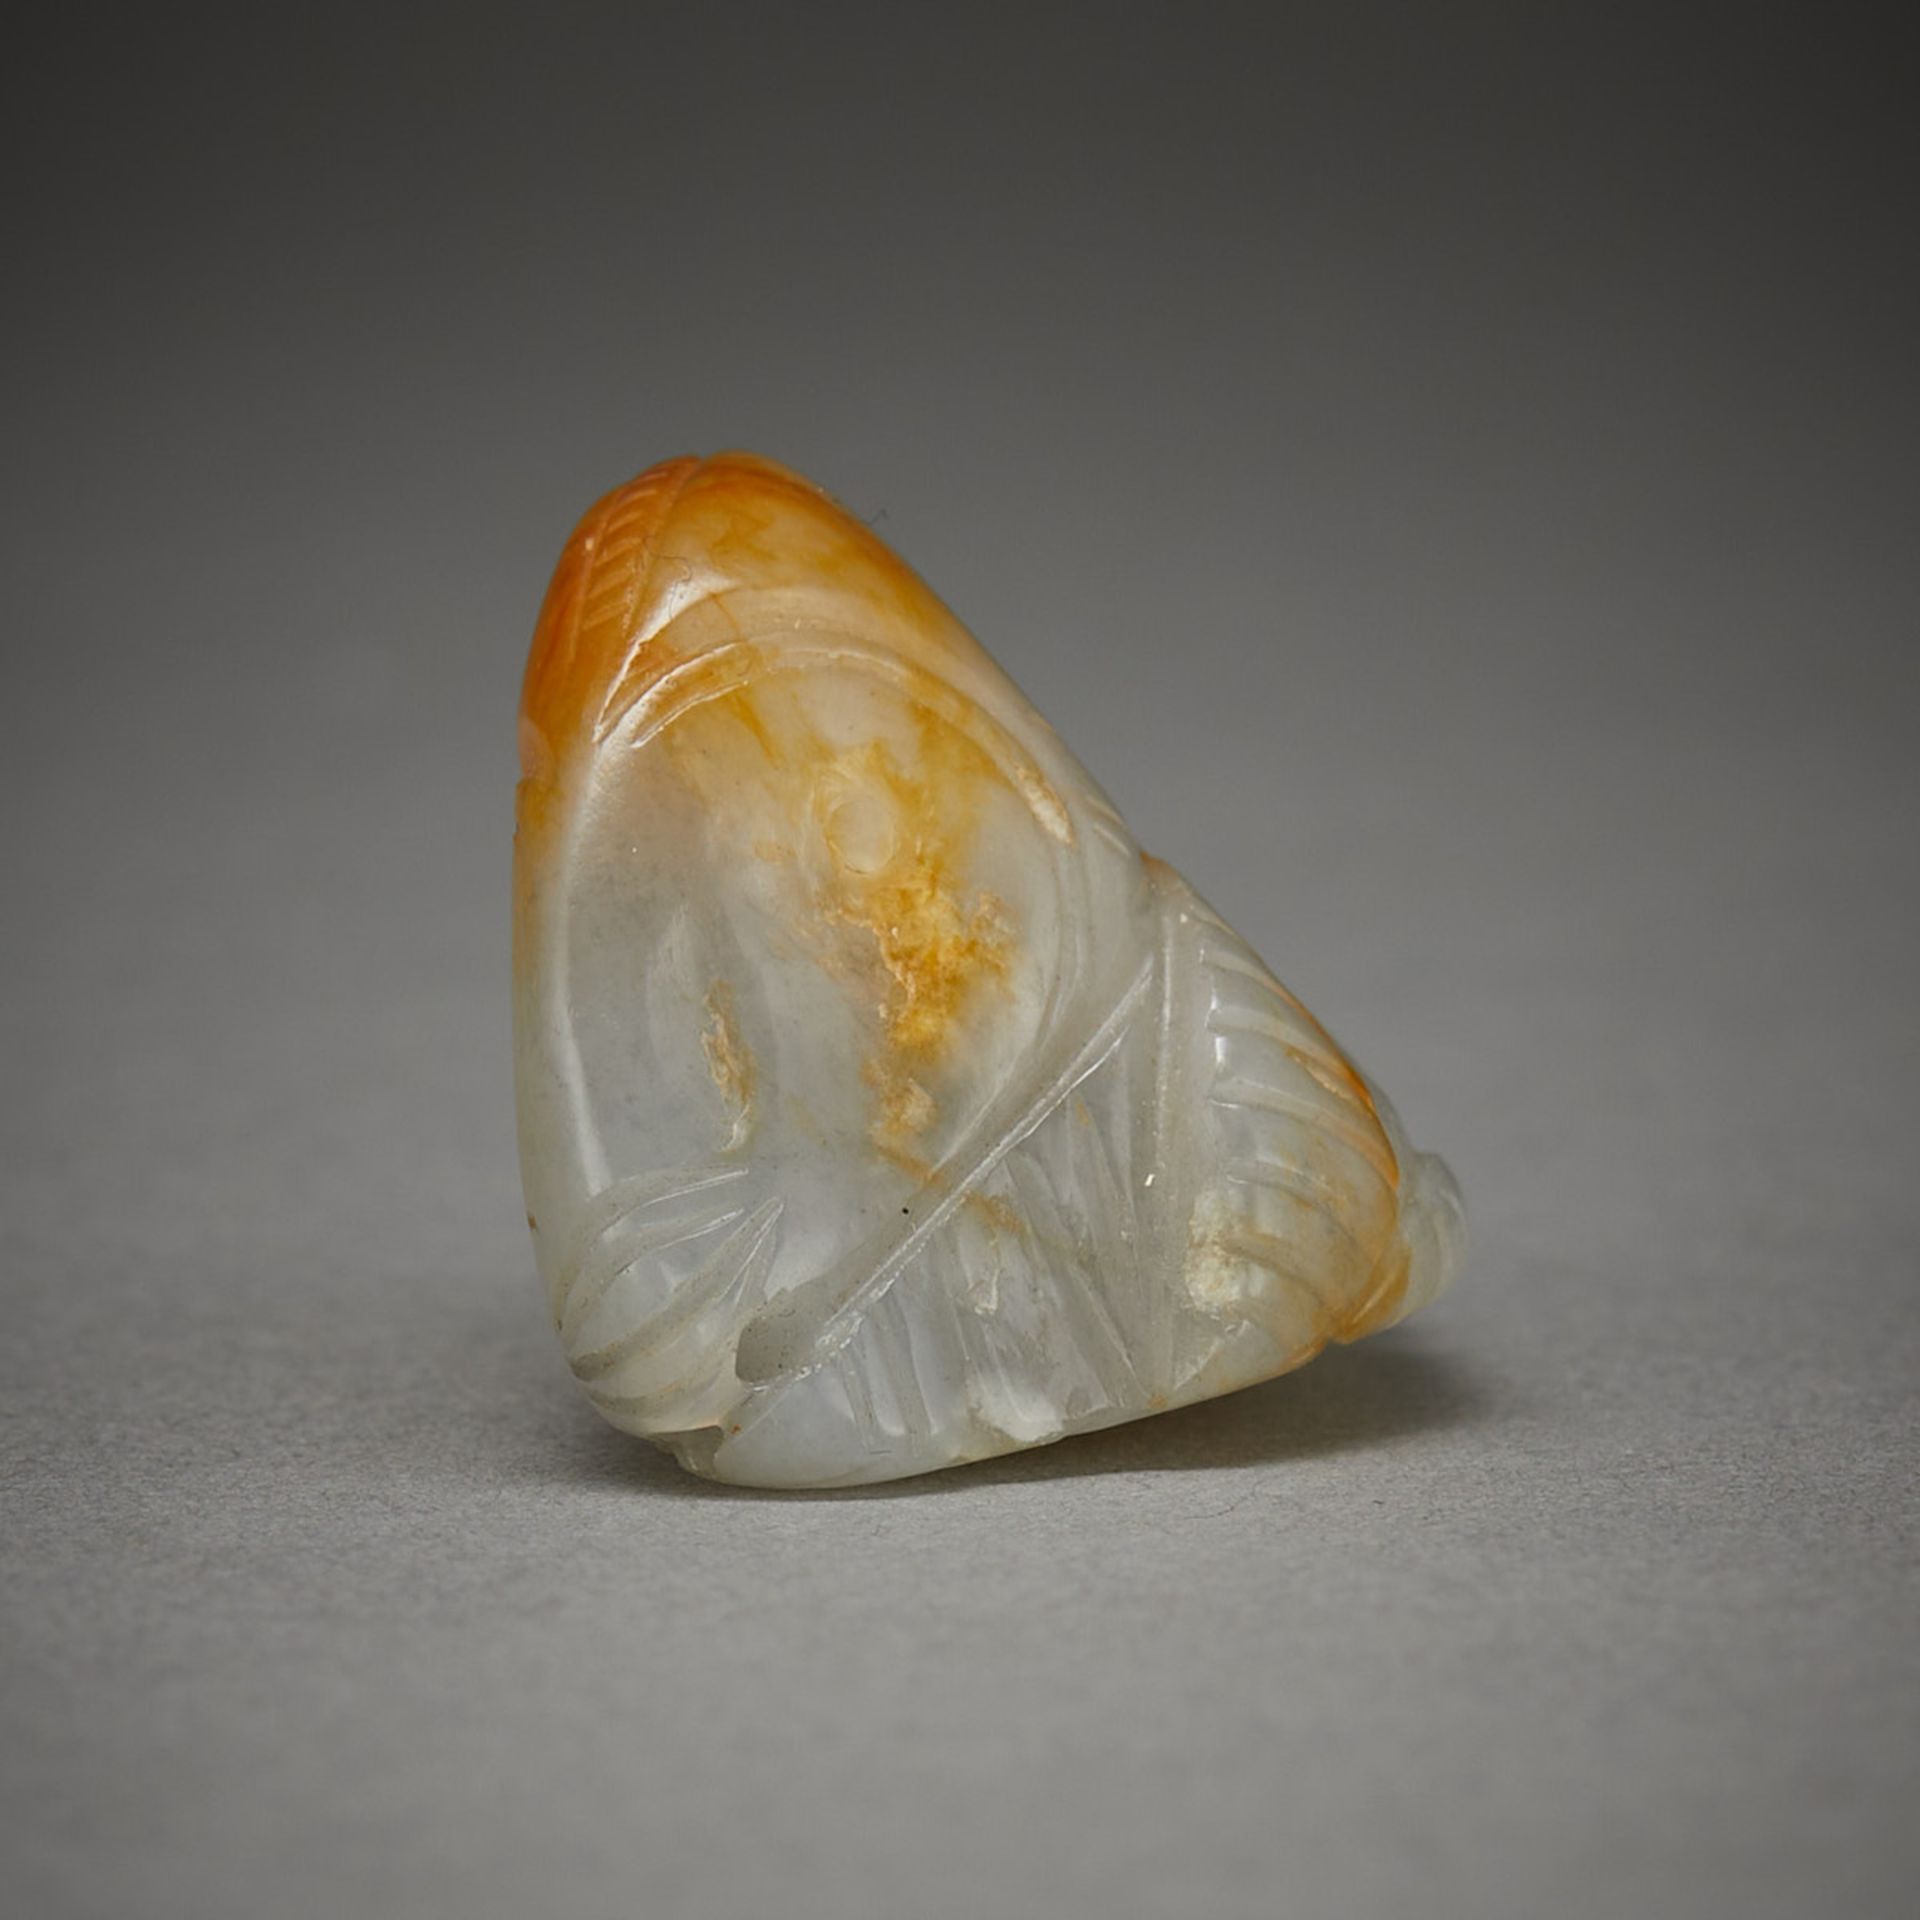 Chinese Carved Jade Fish - Image 5 of 8